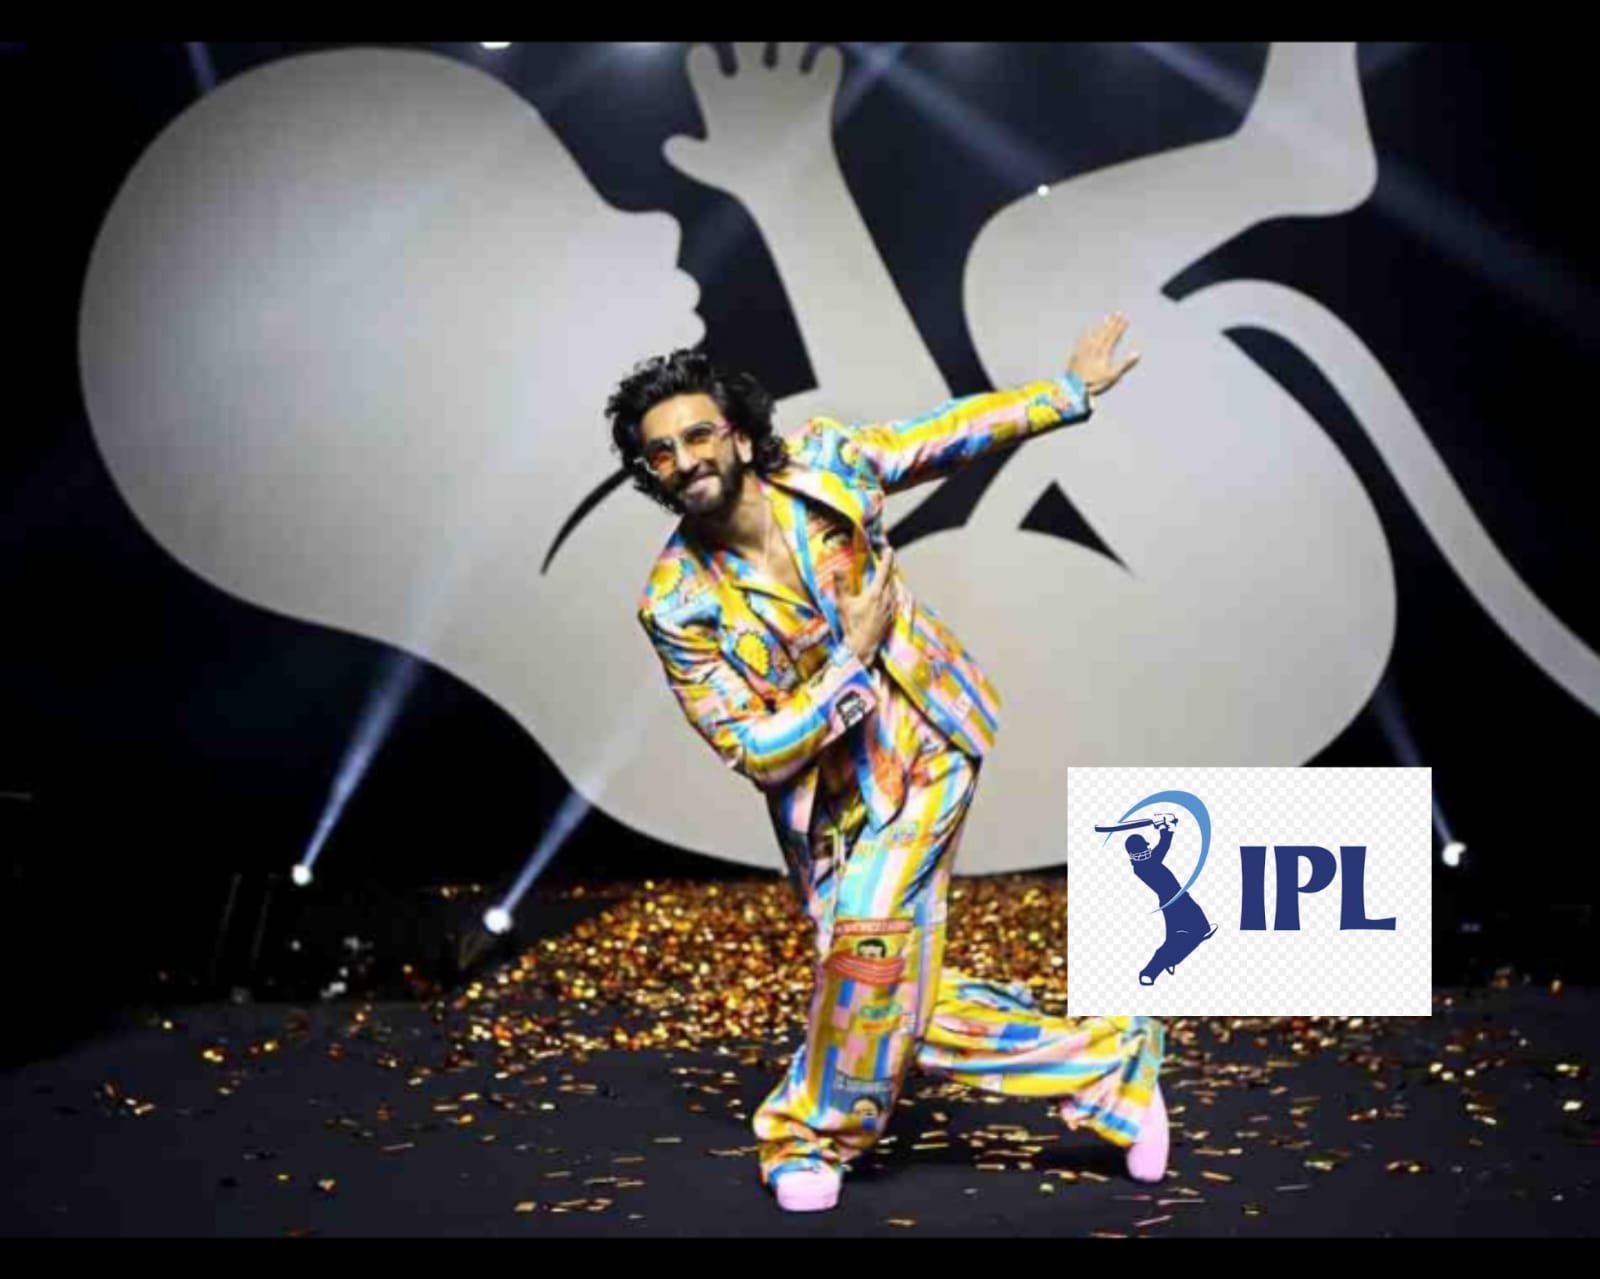 IPL 2022 Closing Ceremony: Besides Ranveer Singh, IPL 2022 Closing Ceremony will also feature Jharkhand's famous CHHAU DANCE - Check Details